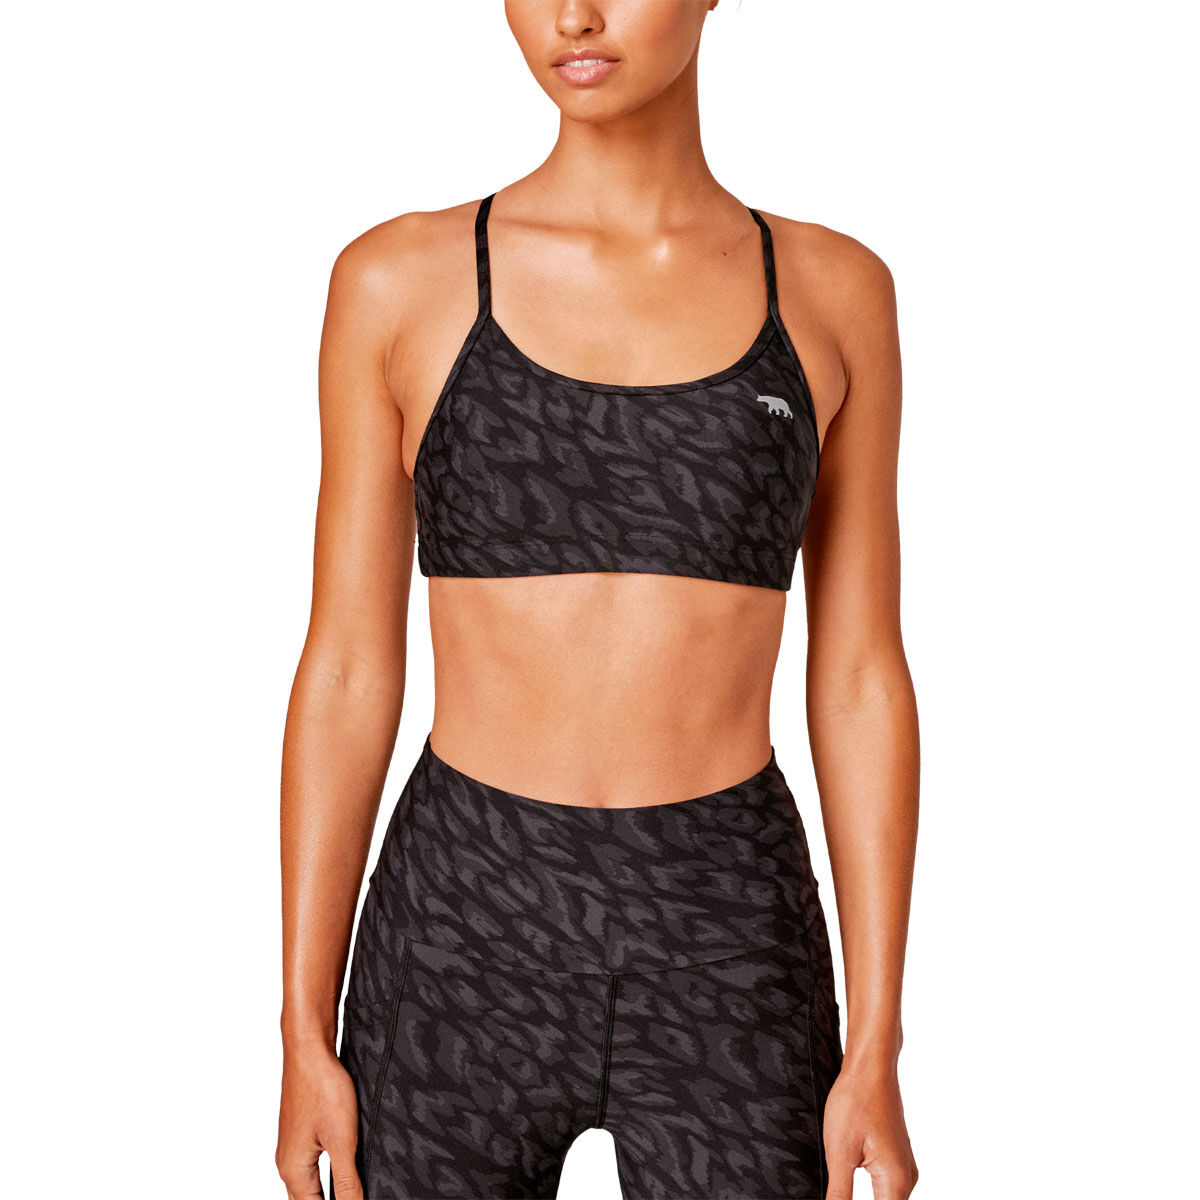 Buy Running Bare Sports Bras & Crops, Clothing Online